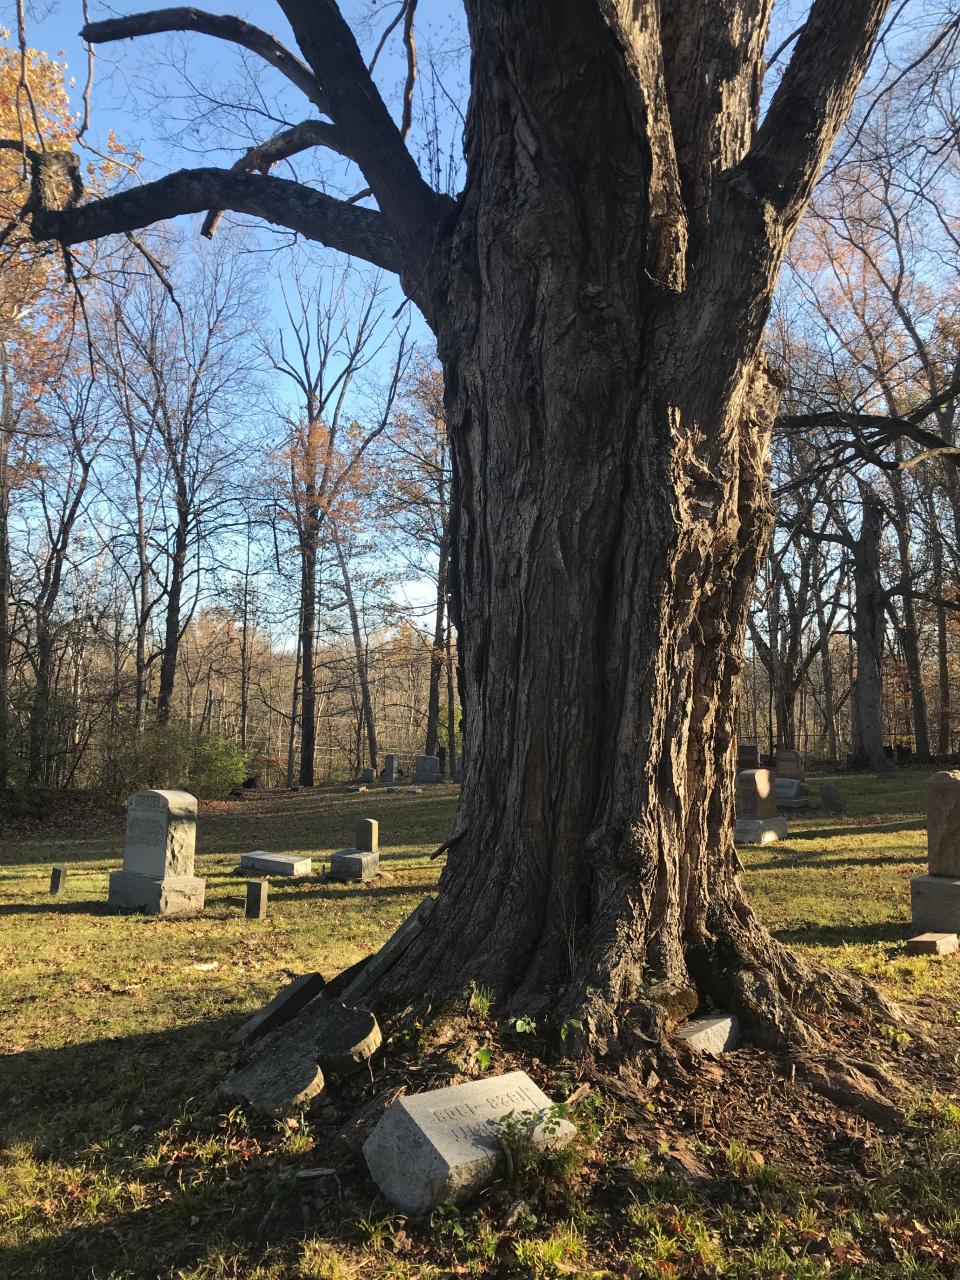 A hackberry tree was allowed to grow up and around stones, consuming one on the right. Note also the abandoned stones on the left, propped against tree. No telling where the corresponding graves are.